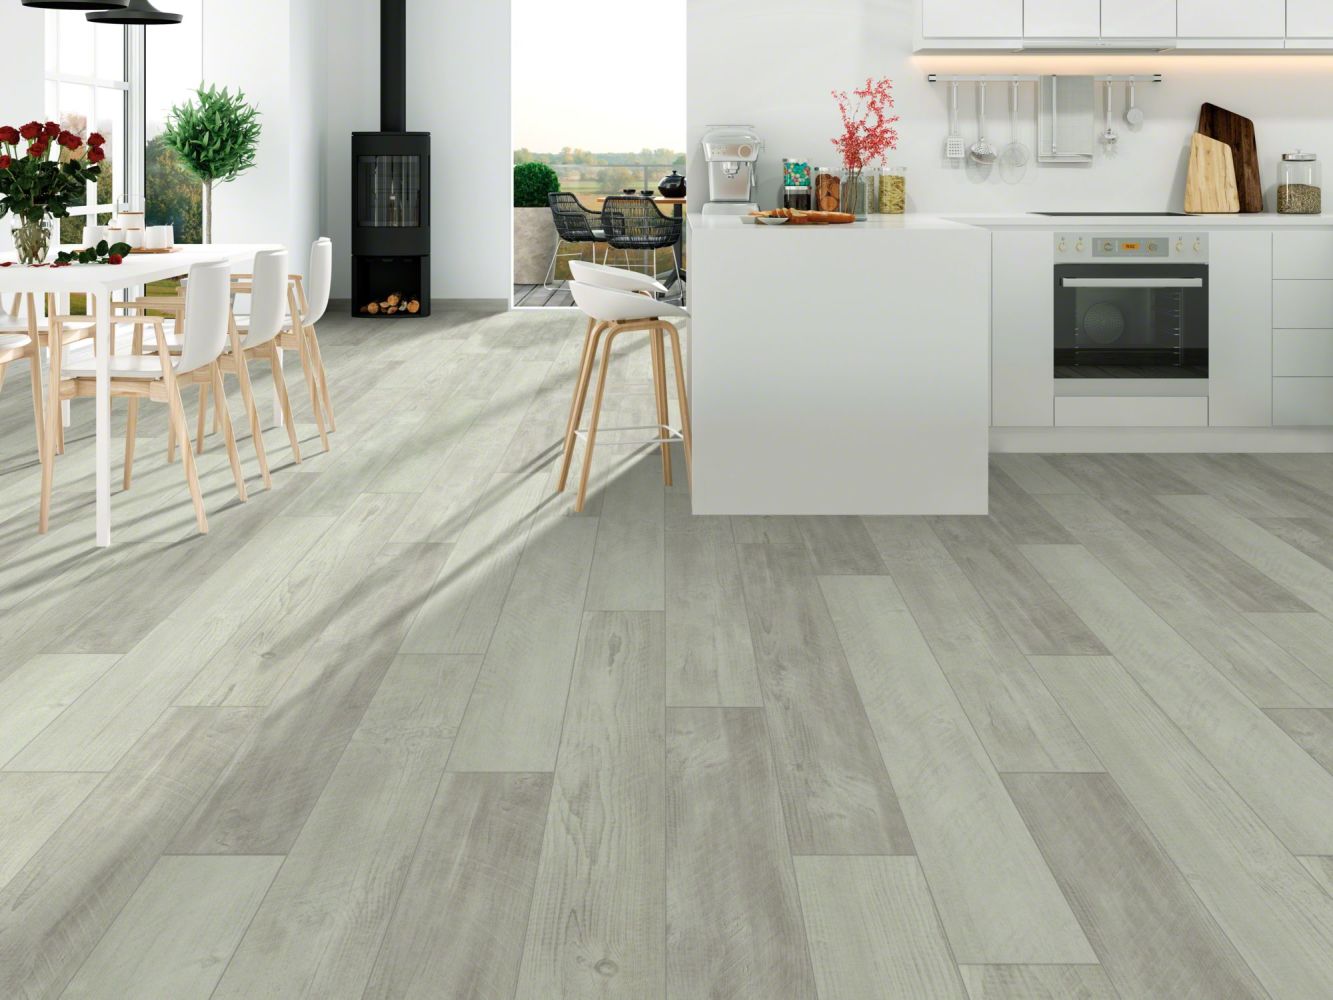 Shaw Floors Resilient Residential Mountain Pine 720c Plus Distressed Pine 00164_515SA